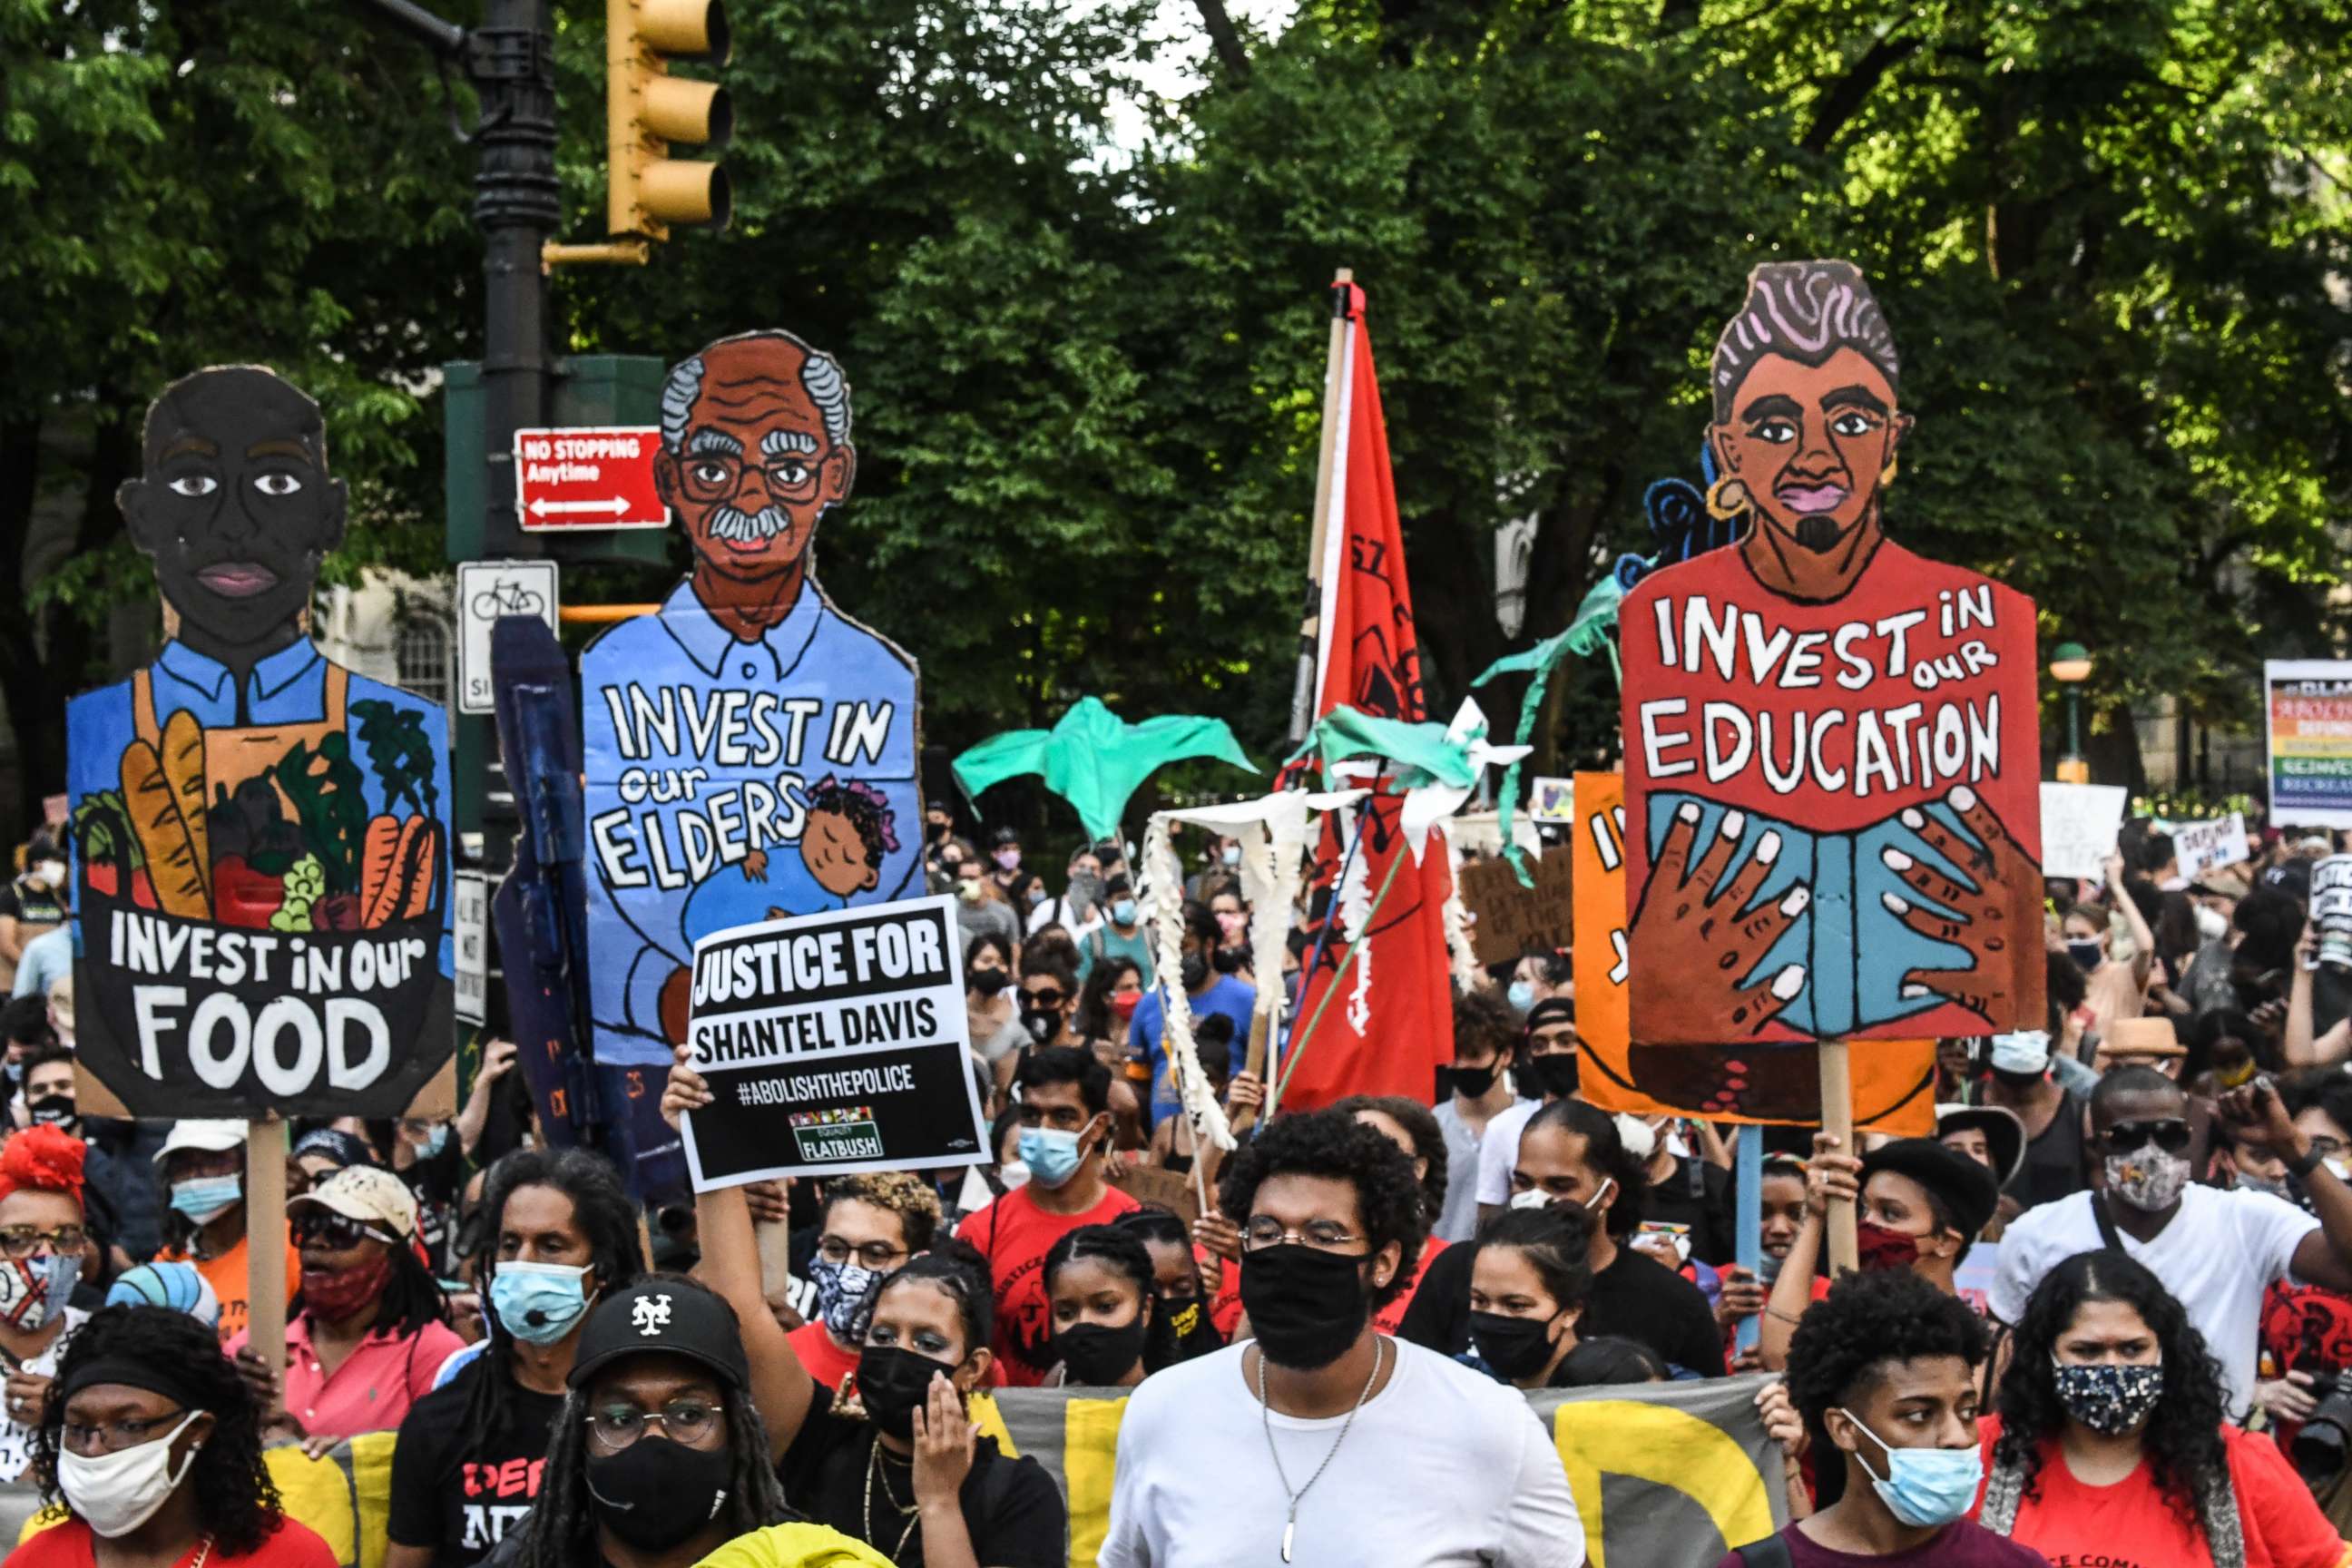 PHOTO: People begin a march out of a protest encampment on June 25, 2020, in a park near City Hall in New York.